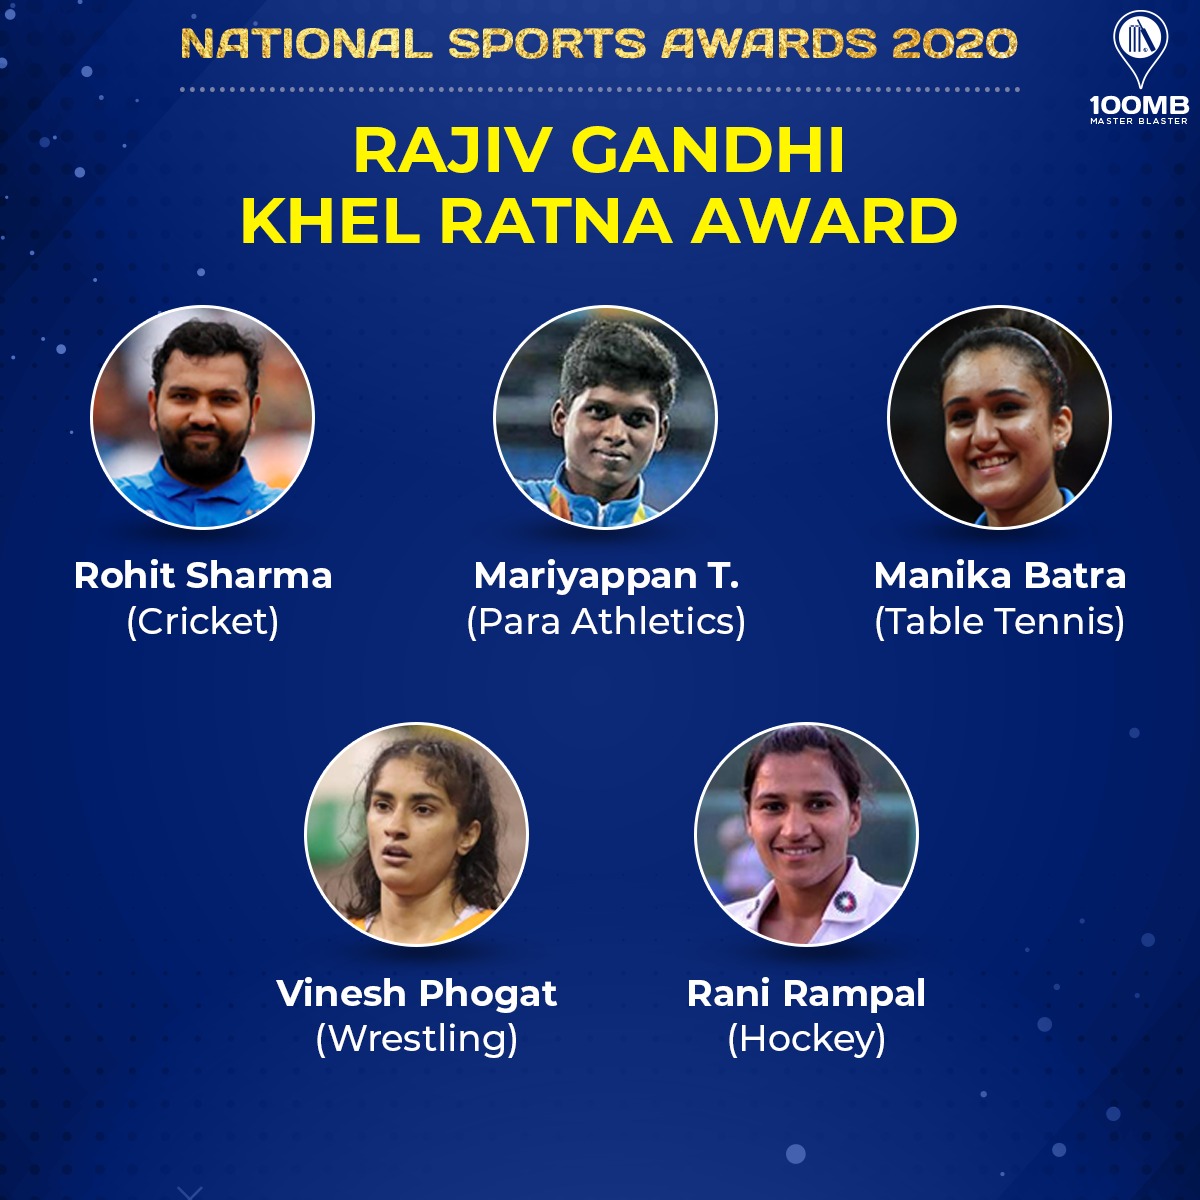 Heartiest congratulations to all the Rajiv Gandhi Khel Ratna awardees & congratulations to everyone conferred with various #NationalSportsAwards by @IndiaSports.

Wishing you all the very best.

Keep making 🇮🇳 proud & inspiring everyone to take up sports.

#SportPlayingNation